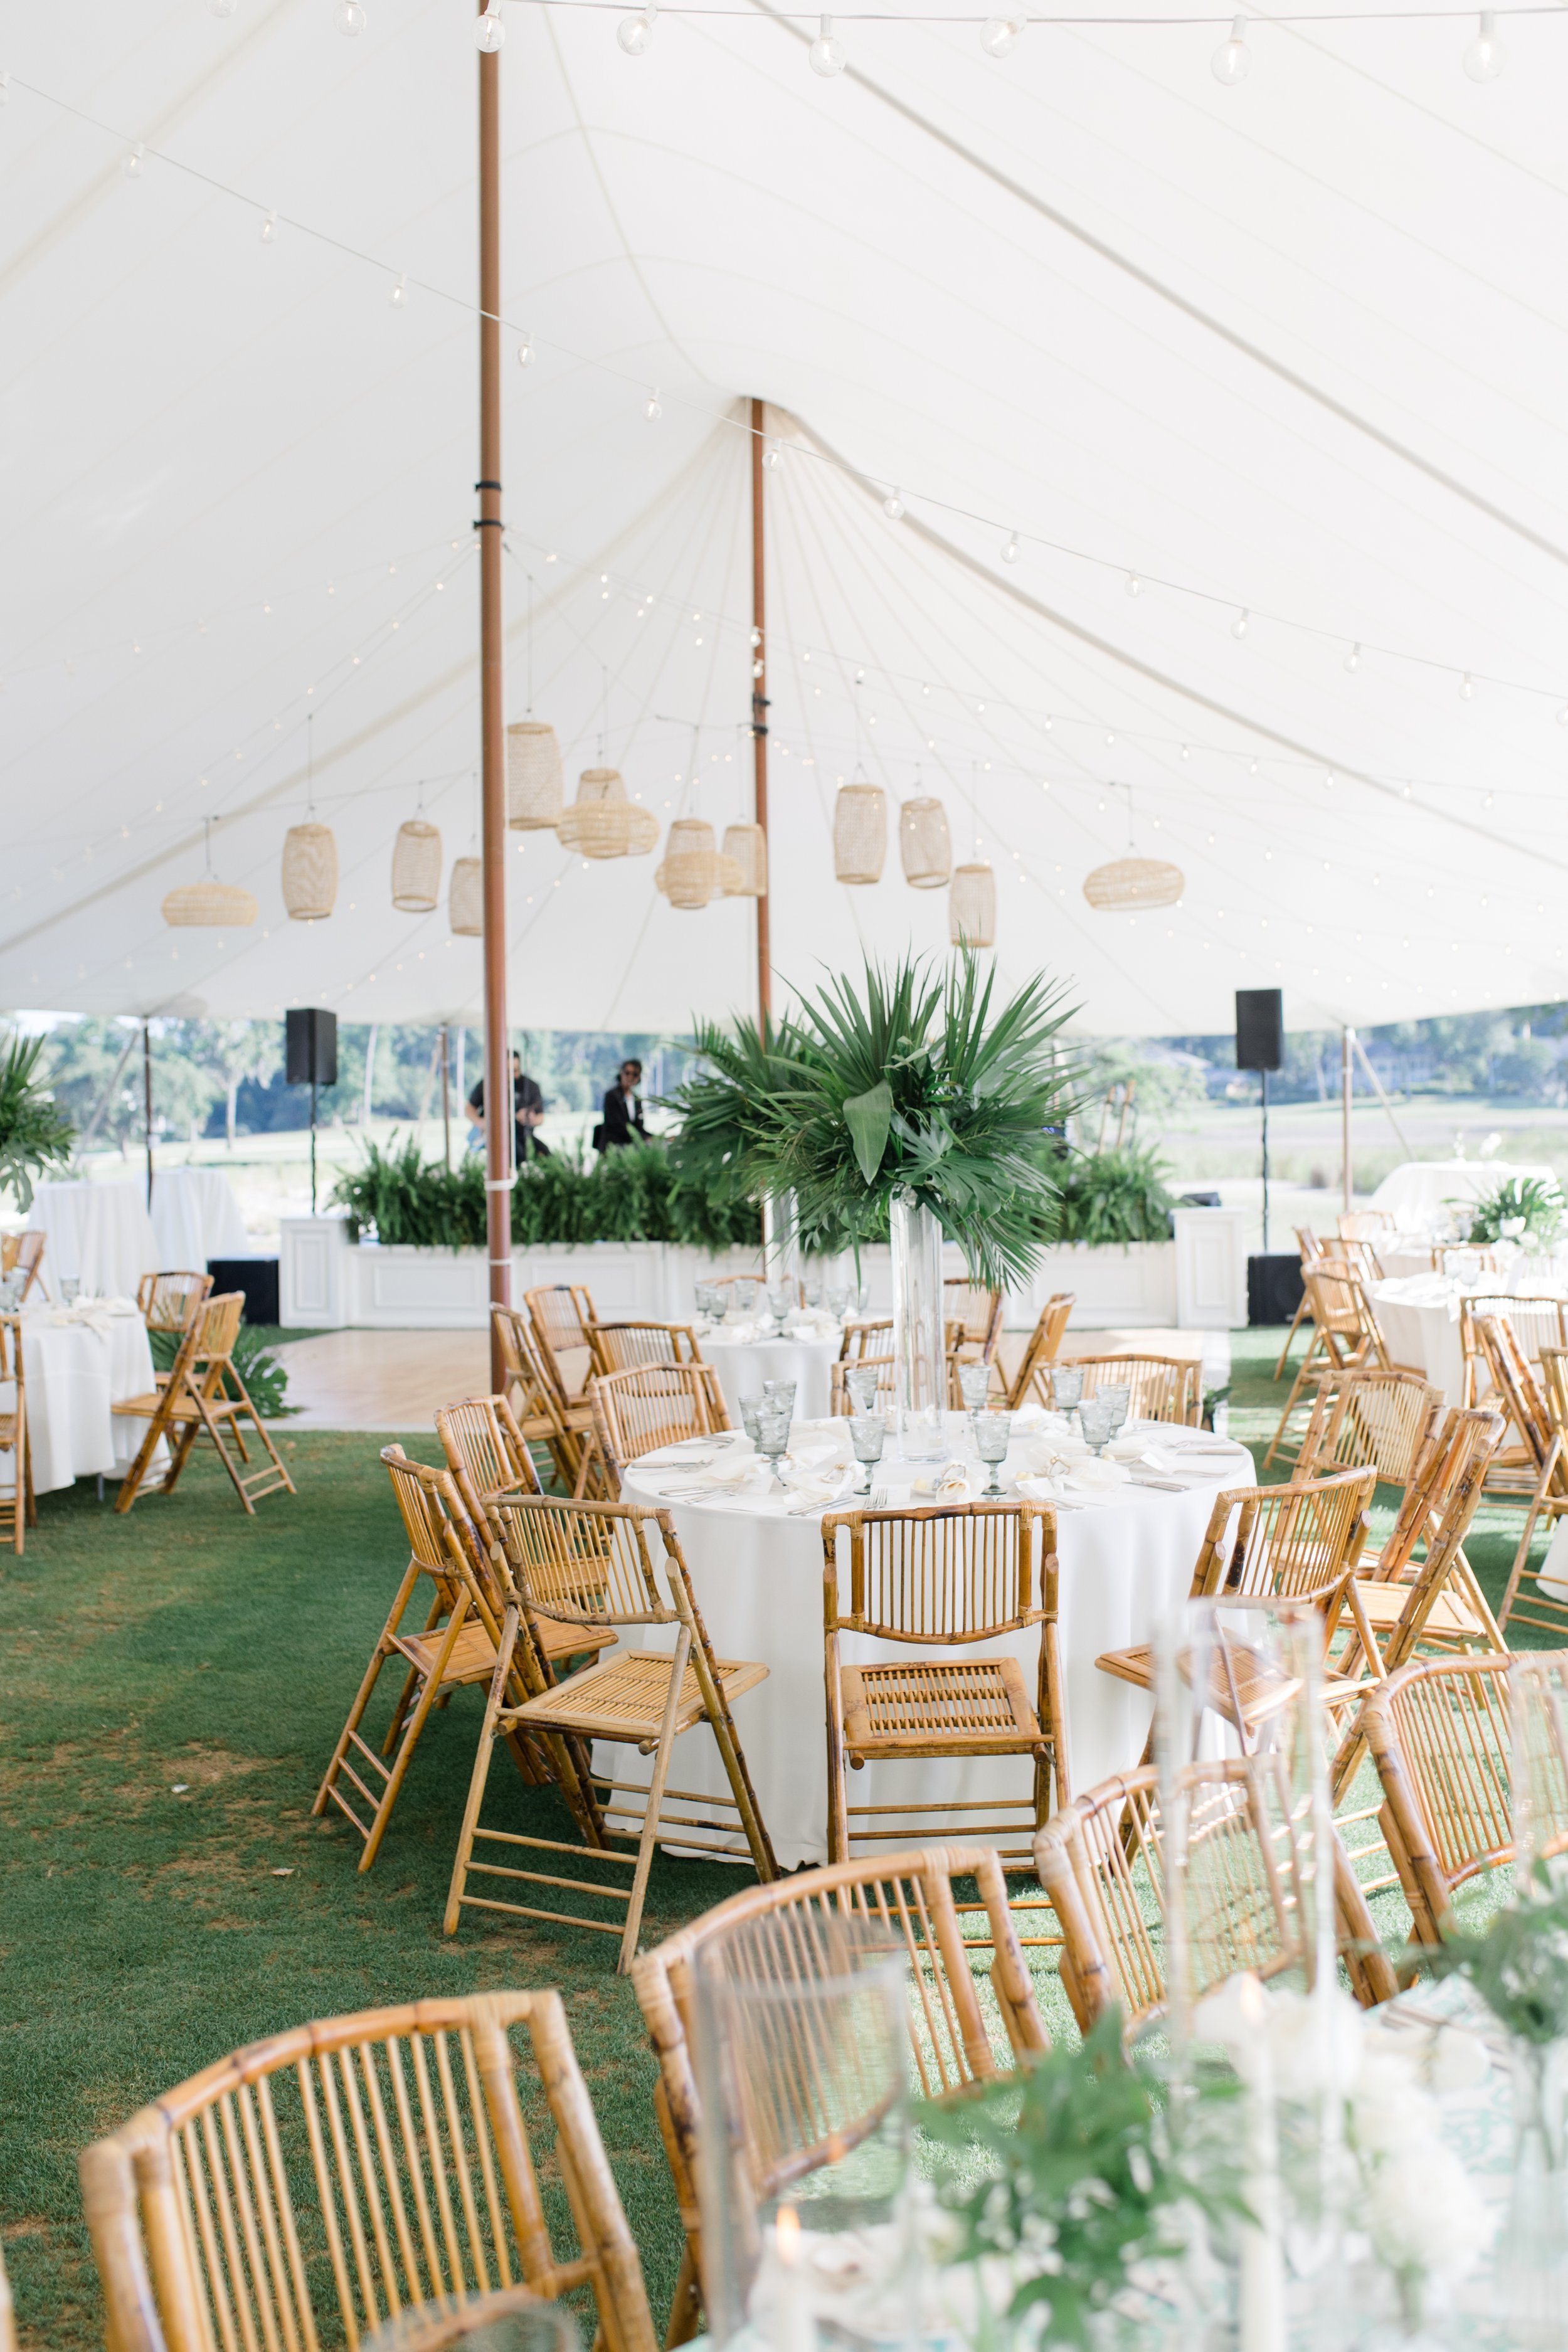 a-southern-chic-south-carolina-wedding-at-the-colleton-river-club-featuring-sophisticated-modern-florals-designed-by-savannah-florist-ivory-and-beau-39.jpg